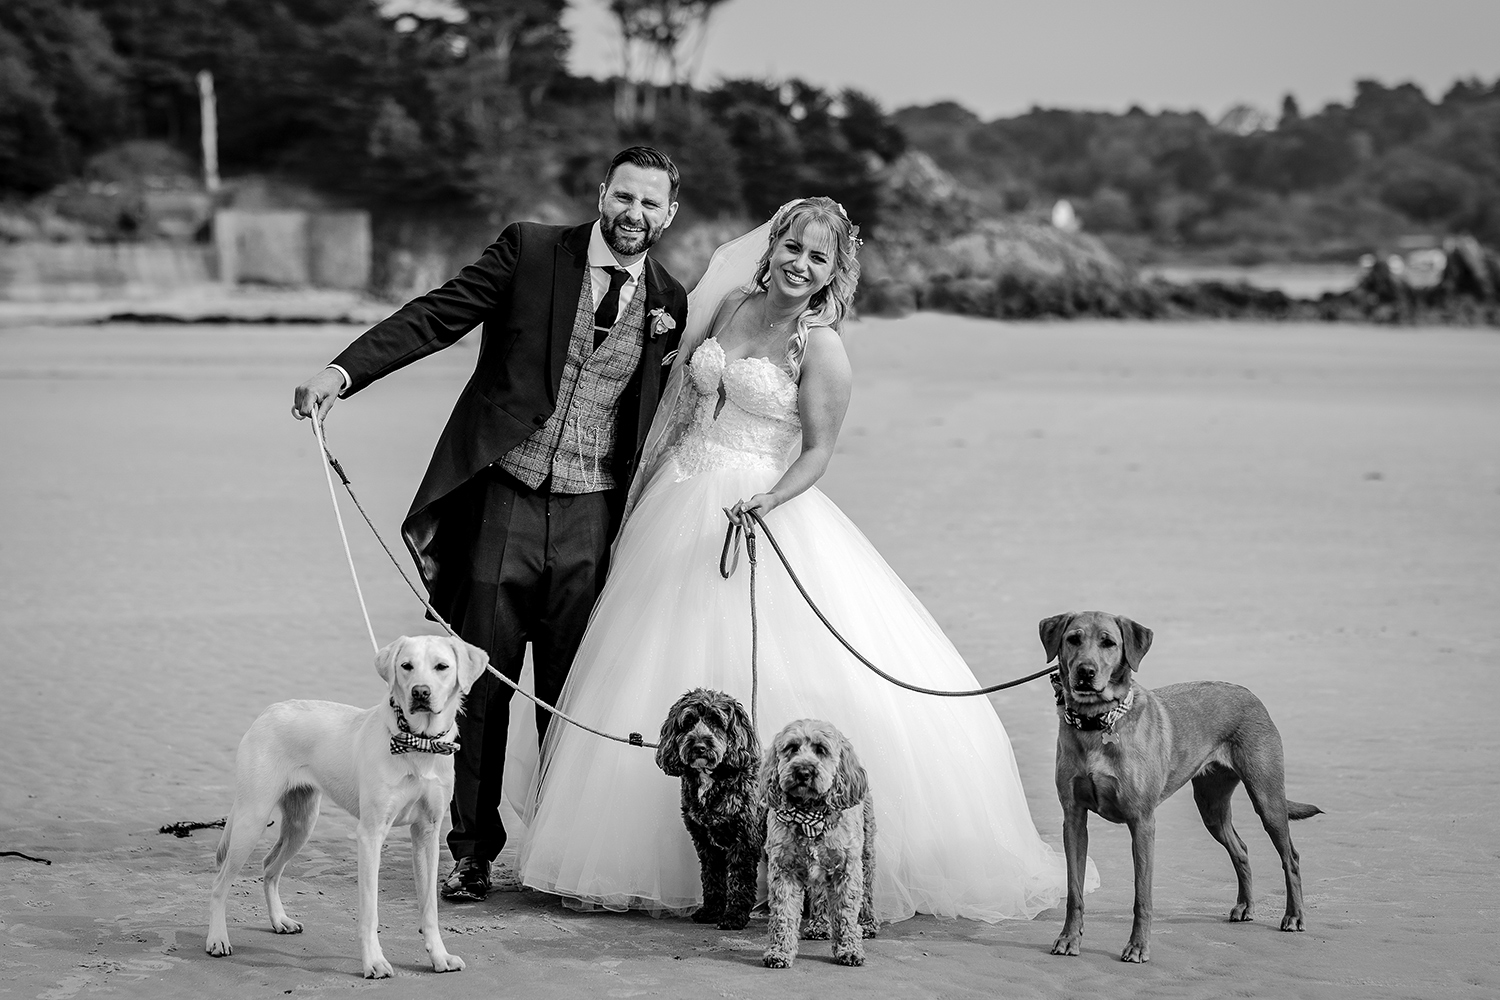 The bride and groom pose happily with their beloved dogs on the beach of St Brelade ahead of their wedding reception at L'Horizon Hotel Jersey, CI